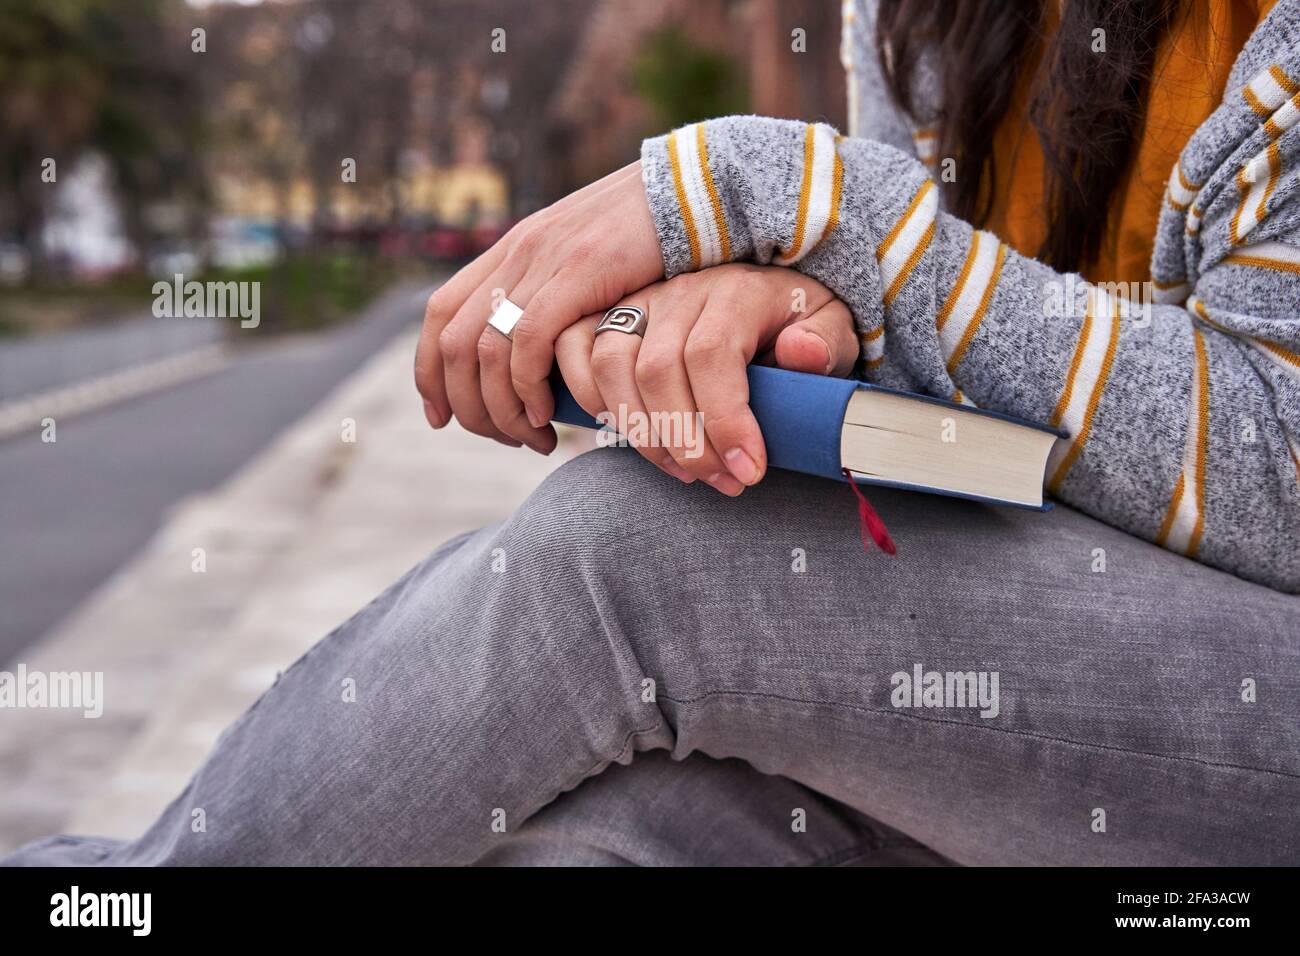 Hands crossed with rings in her fingers on closed book. Midsection detail of lady sitting in a park holding the book on her legs. Knowledge and read c Stock Photo